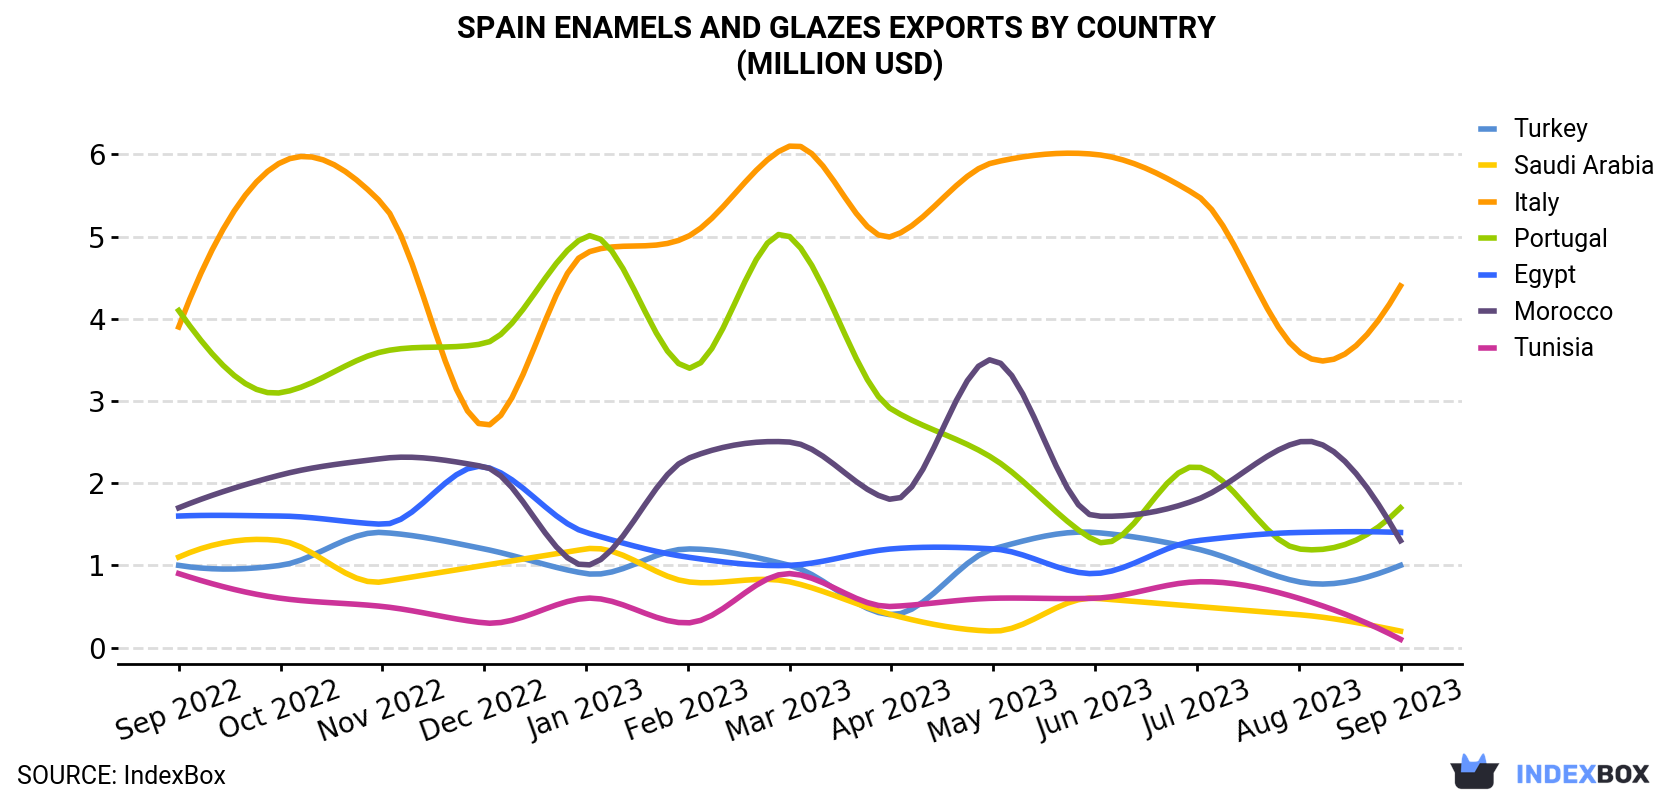 Spain Enamels And Glazes Exports By Country (Million USD)